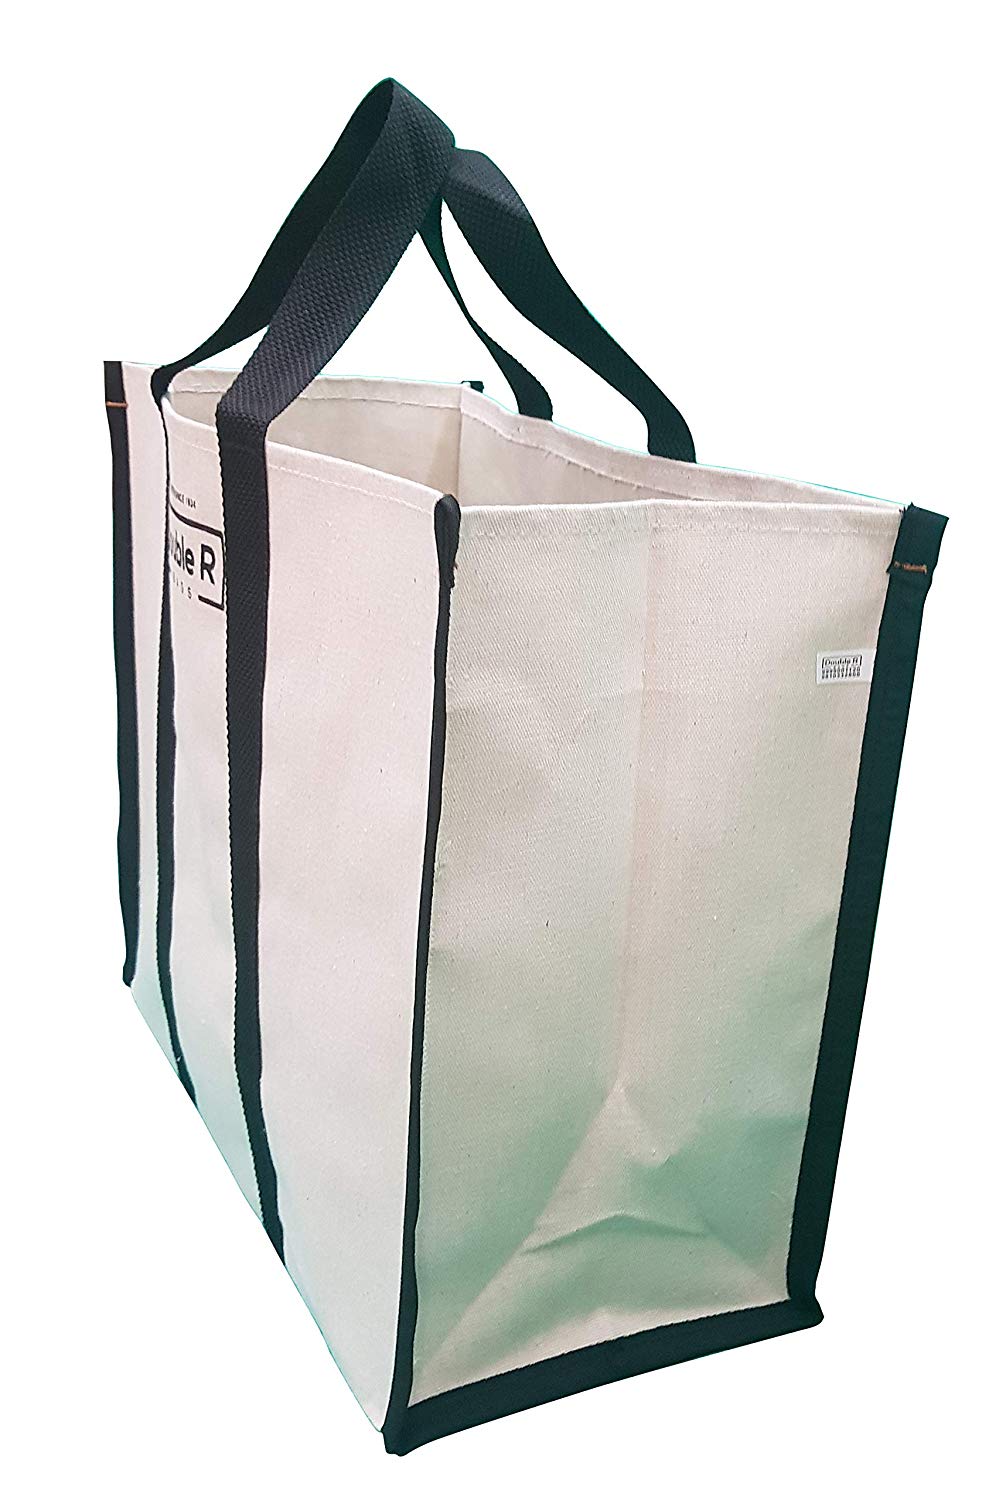 Buy Canvas Shopping Bags for Market Milk, Grocery, Vegetable with ...